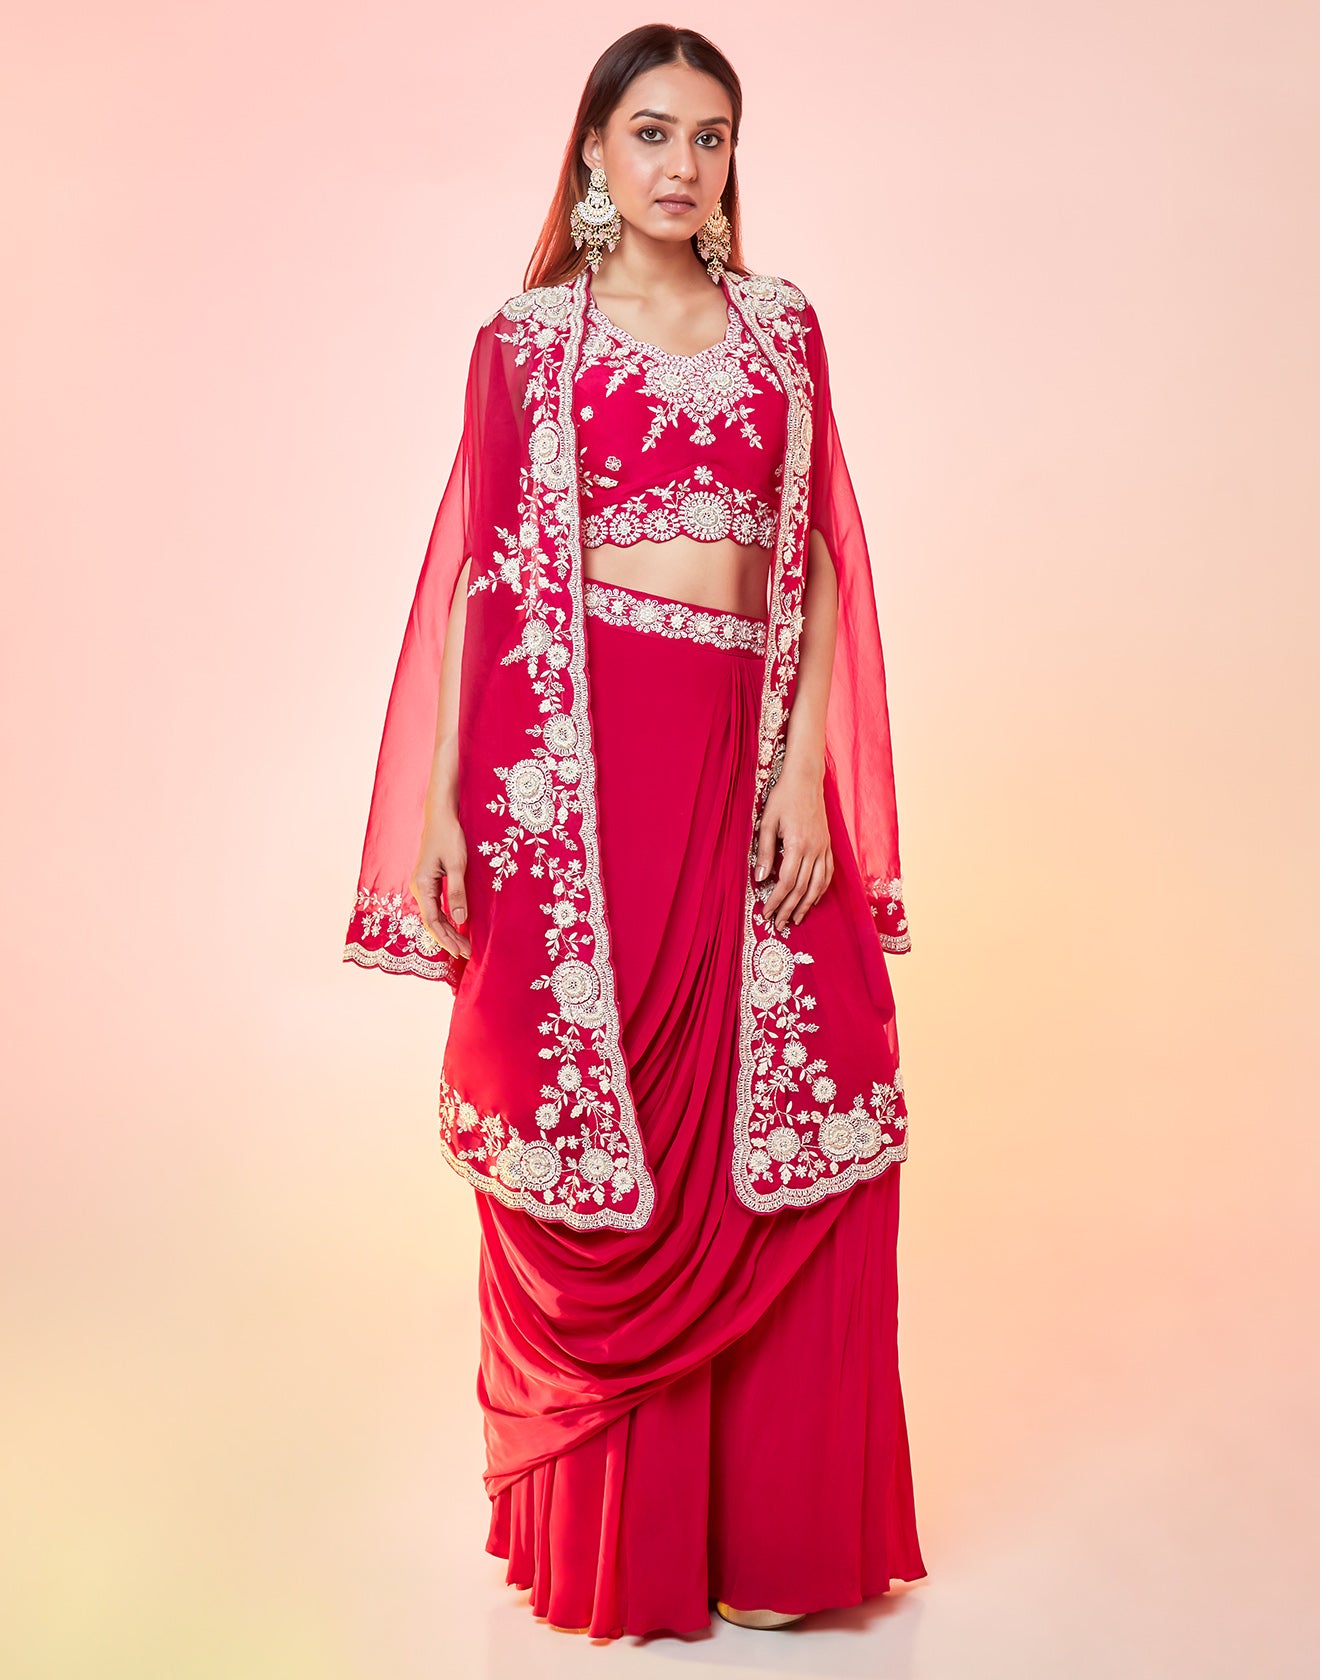 Varsity Pink Draped Draped Fusion Set With Cape Sleeves And Embroidered In Ivory